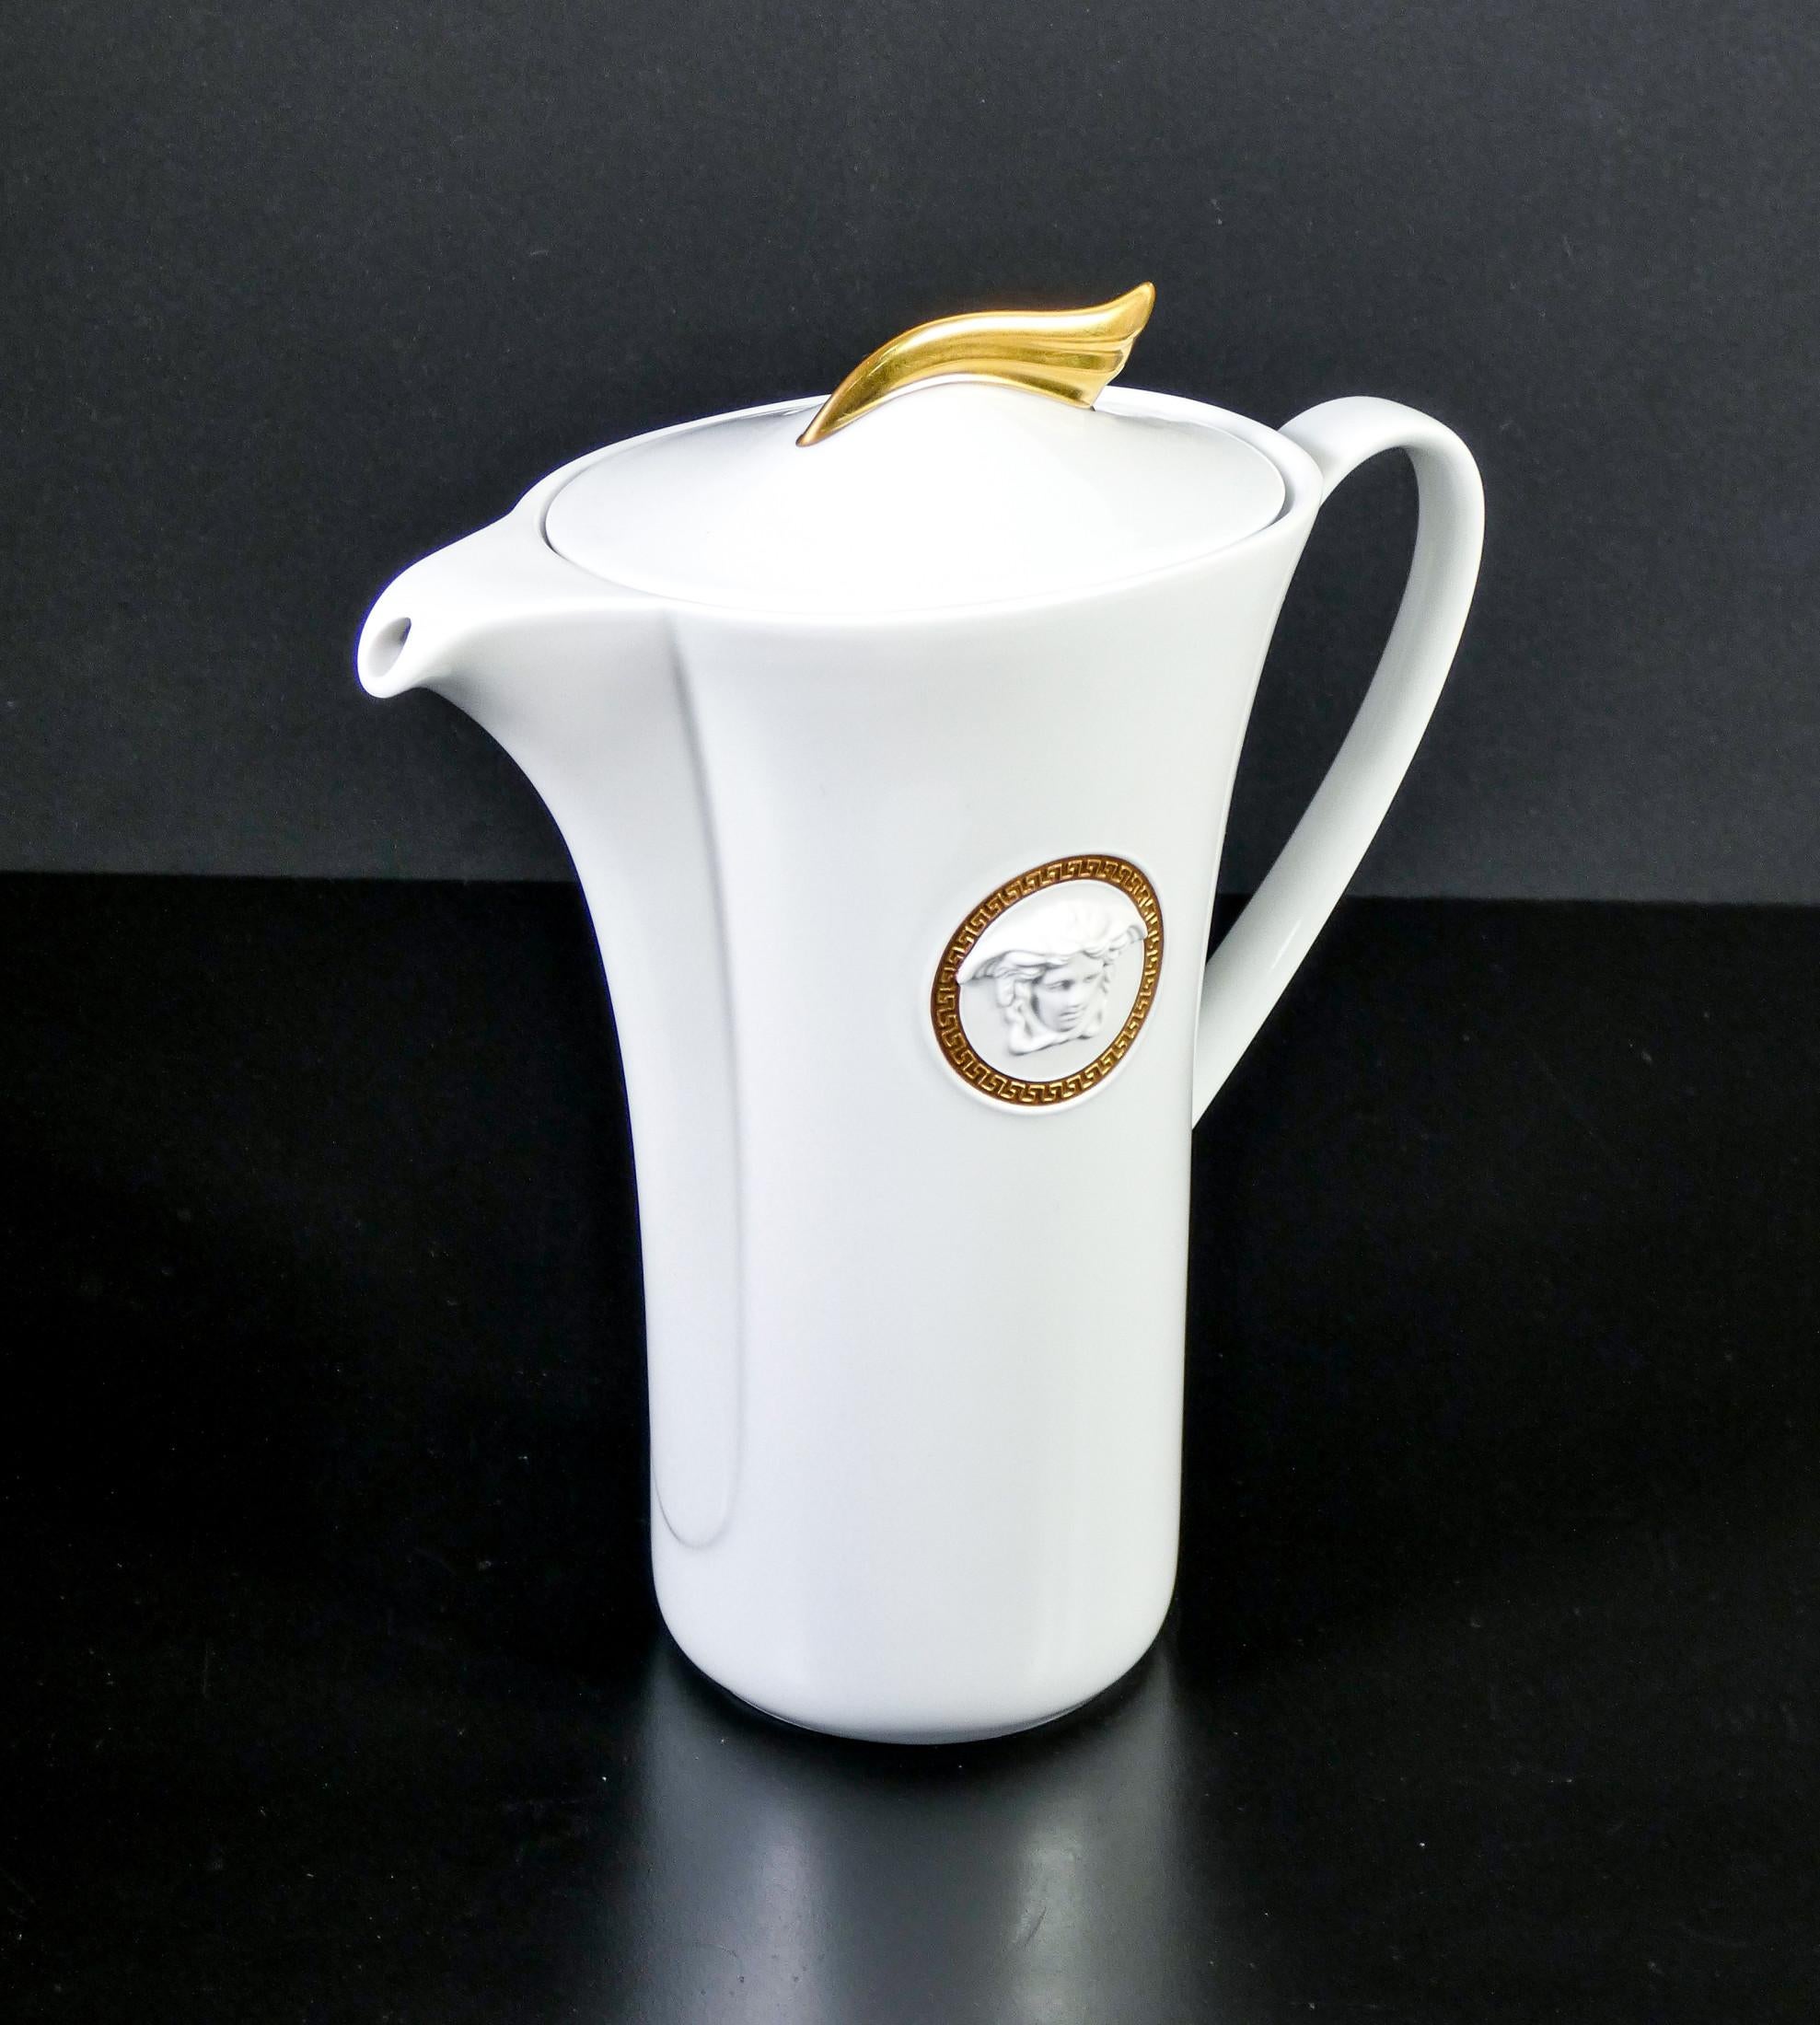 Versace coffee pot
Medaillon Meandre d'Or
Ikarus by Paul Wunderlich.
Rosenthal
Studio Linie

ORIGIN
Germany

DESIGNER
Paul Wunderlich

BRAND
Versace
Rosenthal

MODEL
Coffee pot from the series:
Medaillon Meandre